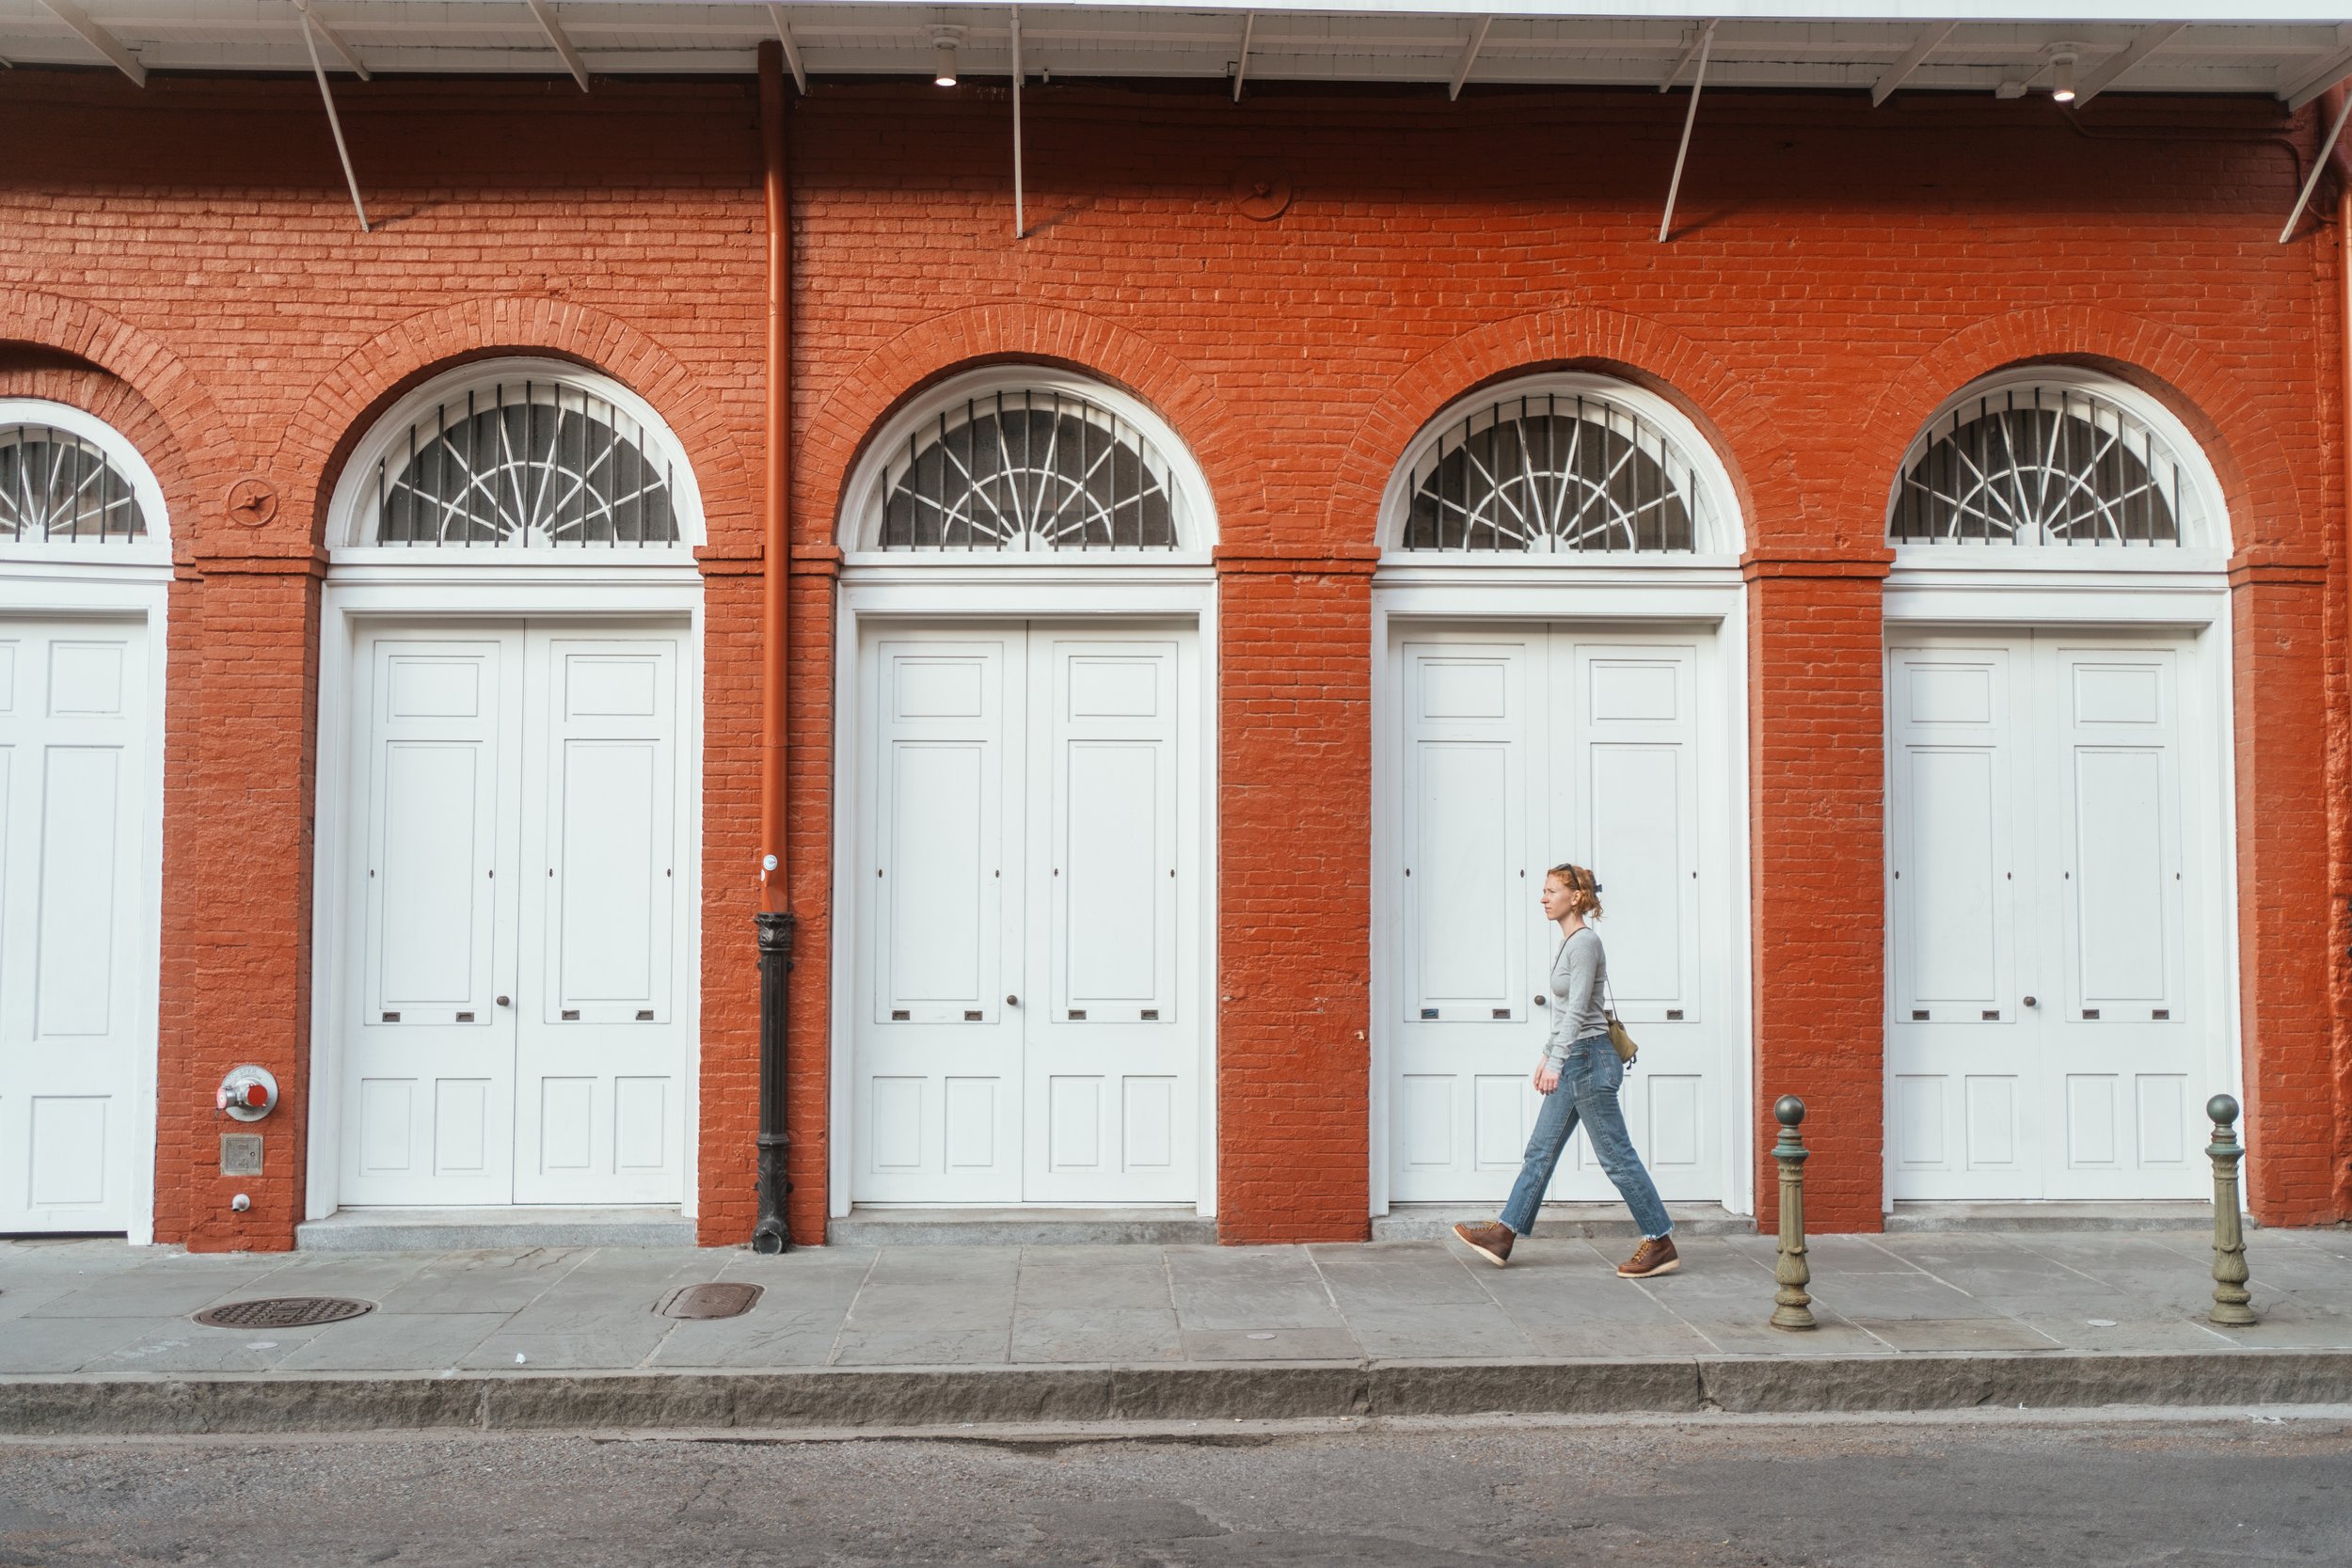 The doors of the French Quarter